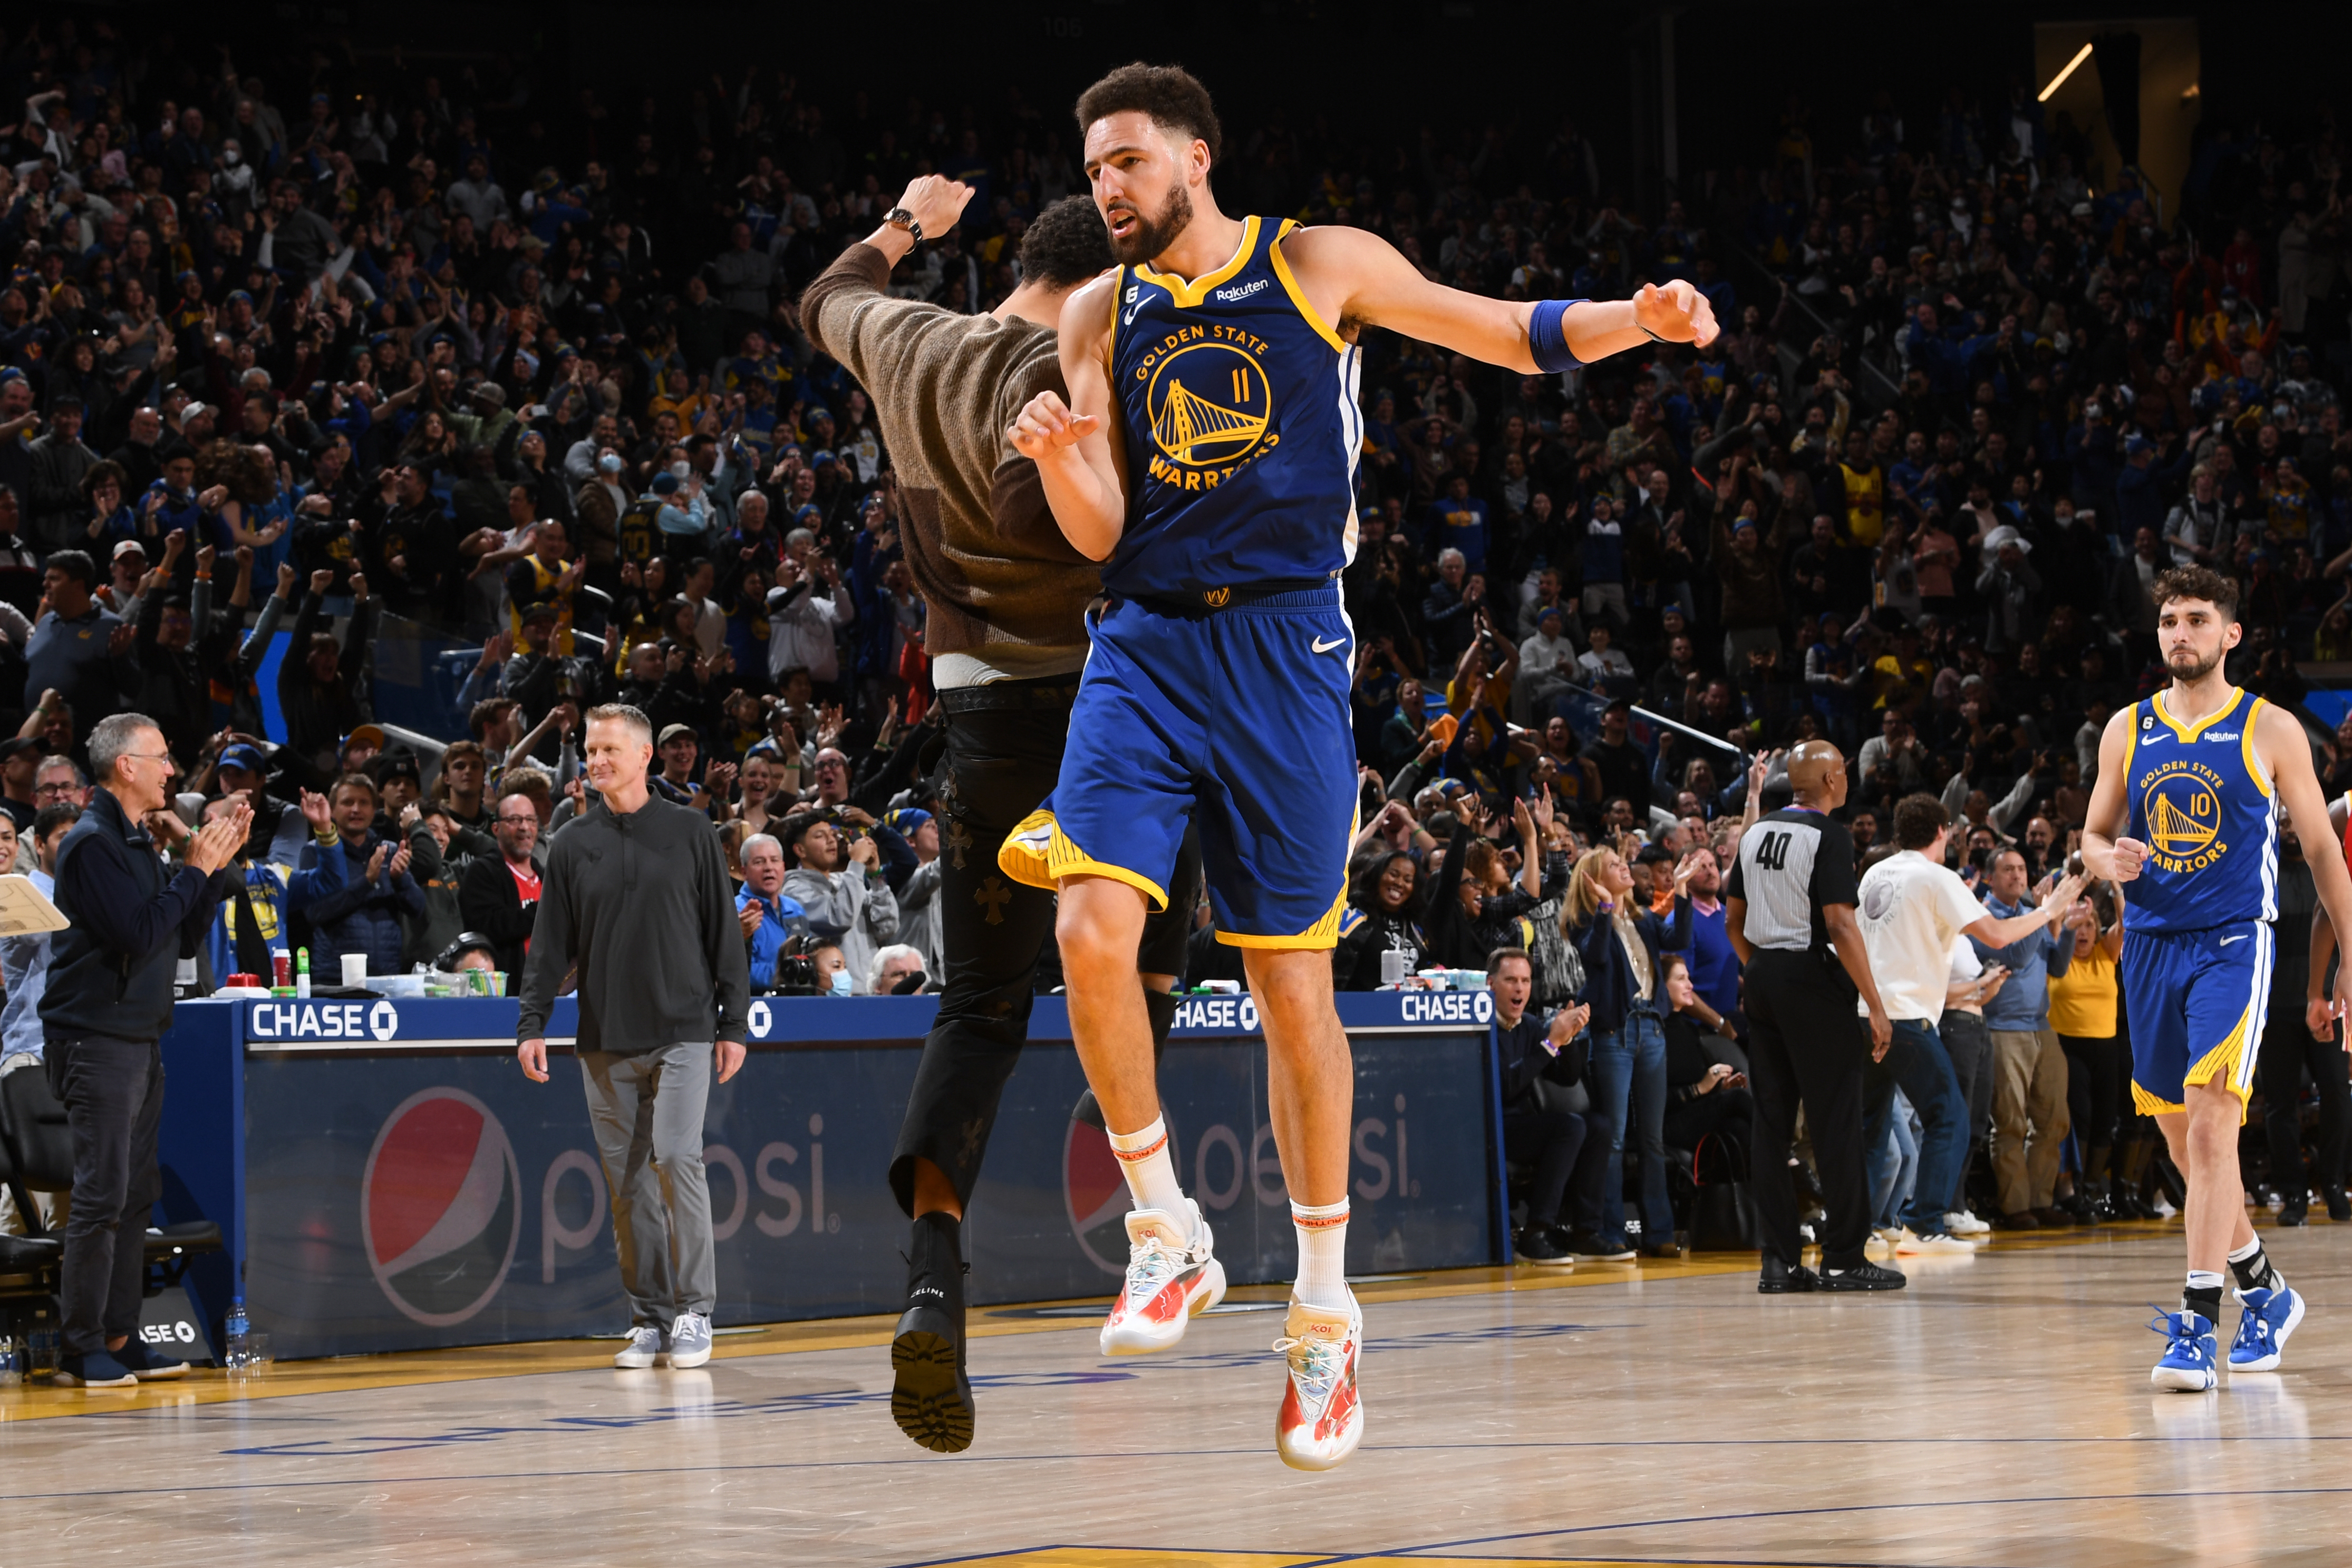 Klay Thompson and Steph Curry chest bumping in the air 